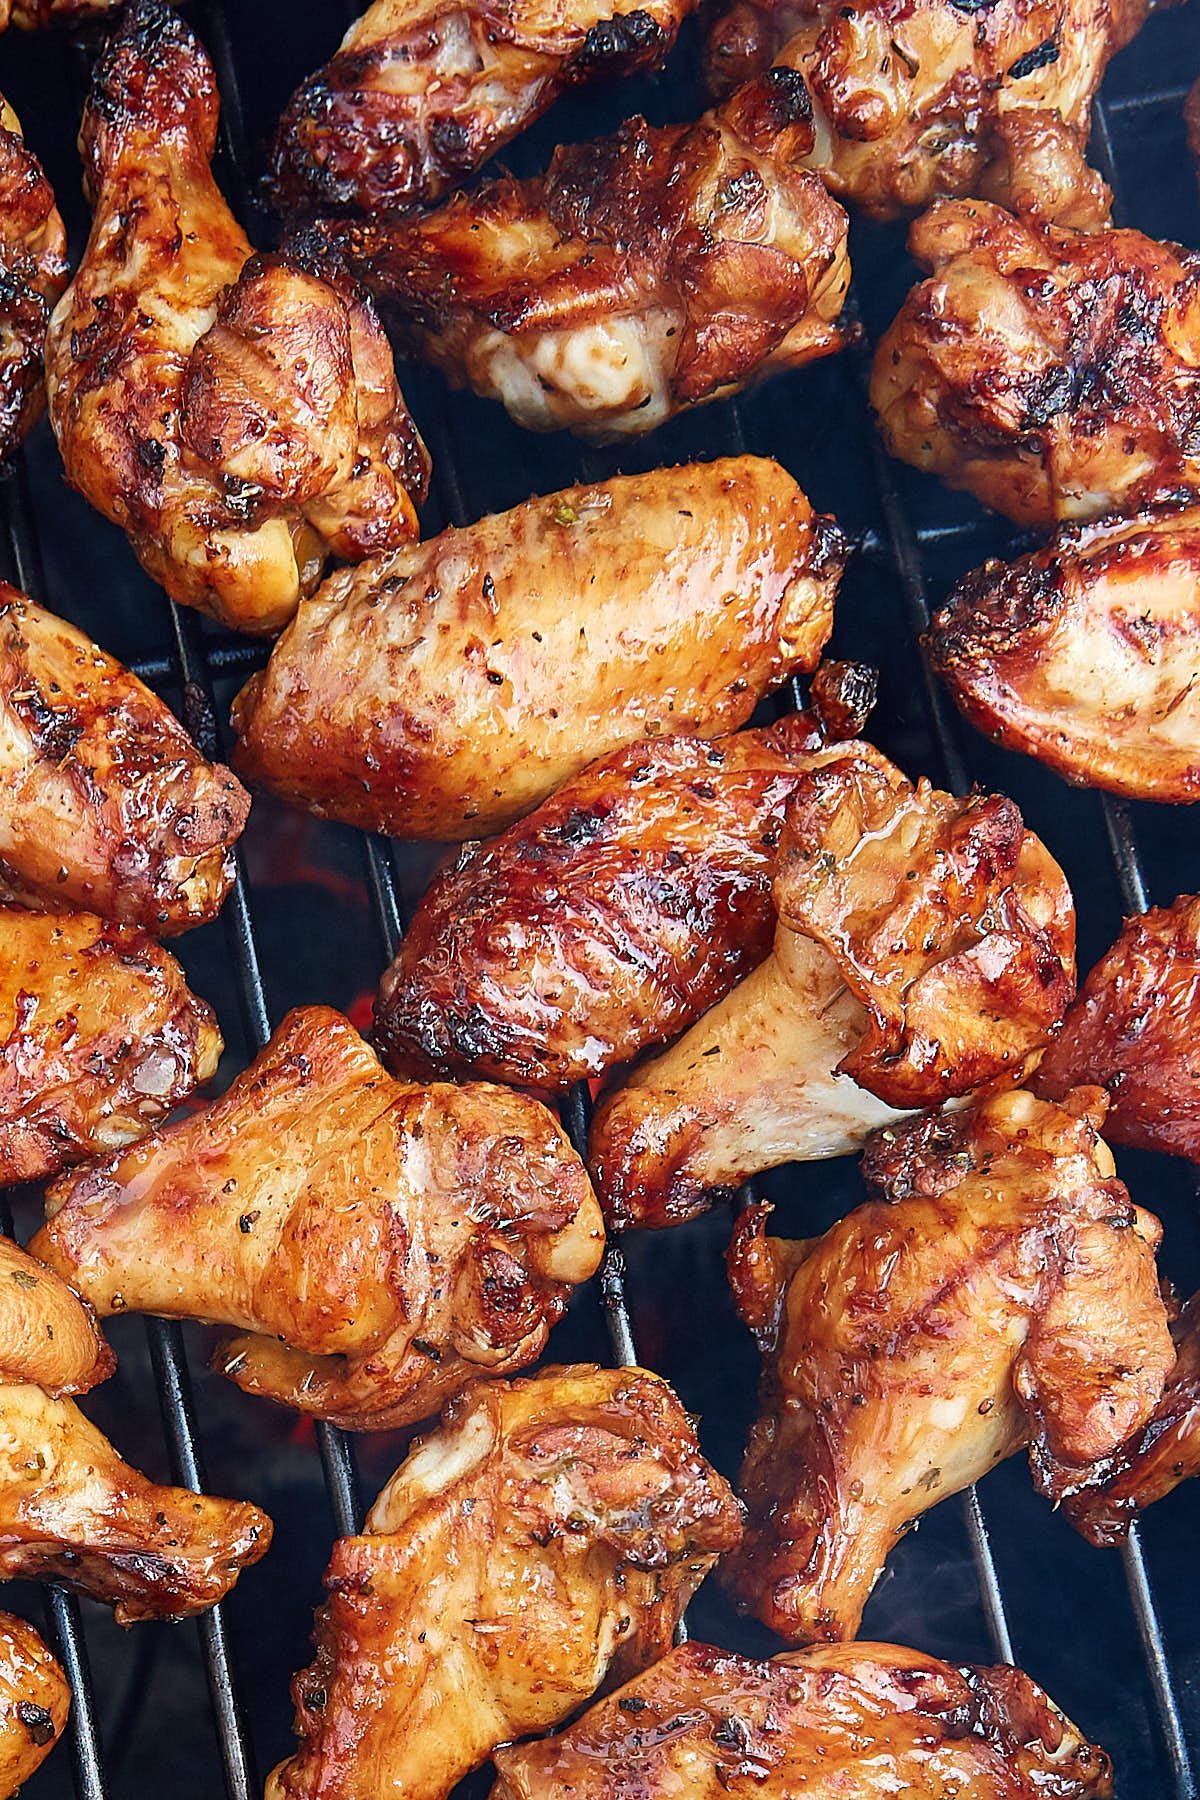 Irresistible Grilled Chicken Wings Craving Tasty,Bake Bacon In Oven 425